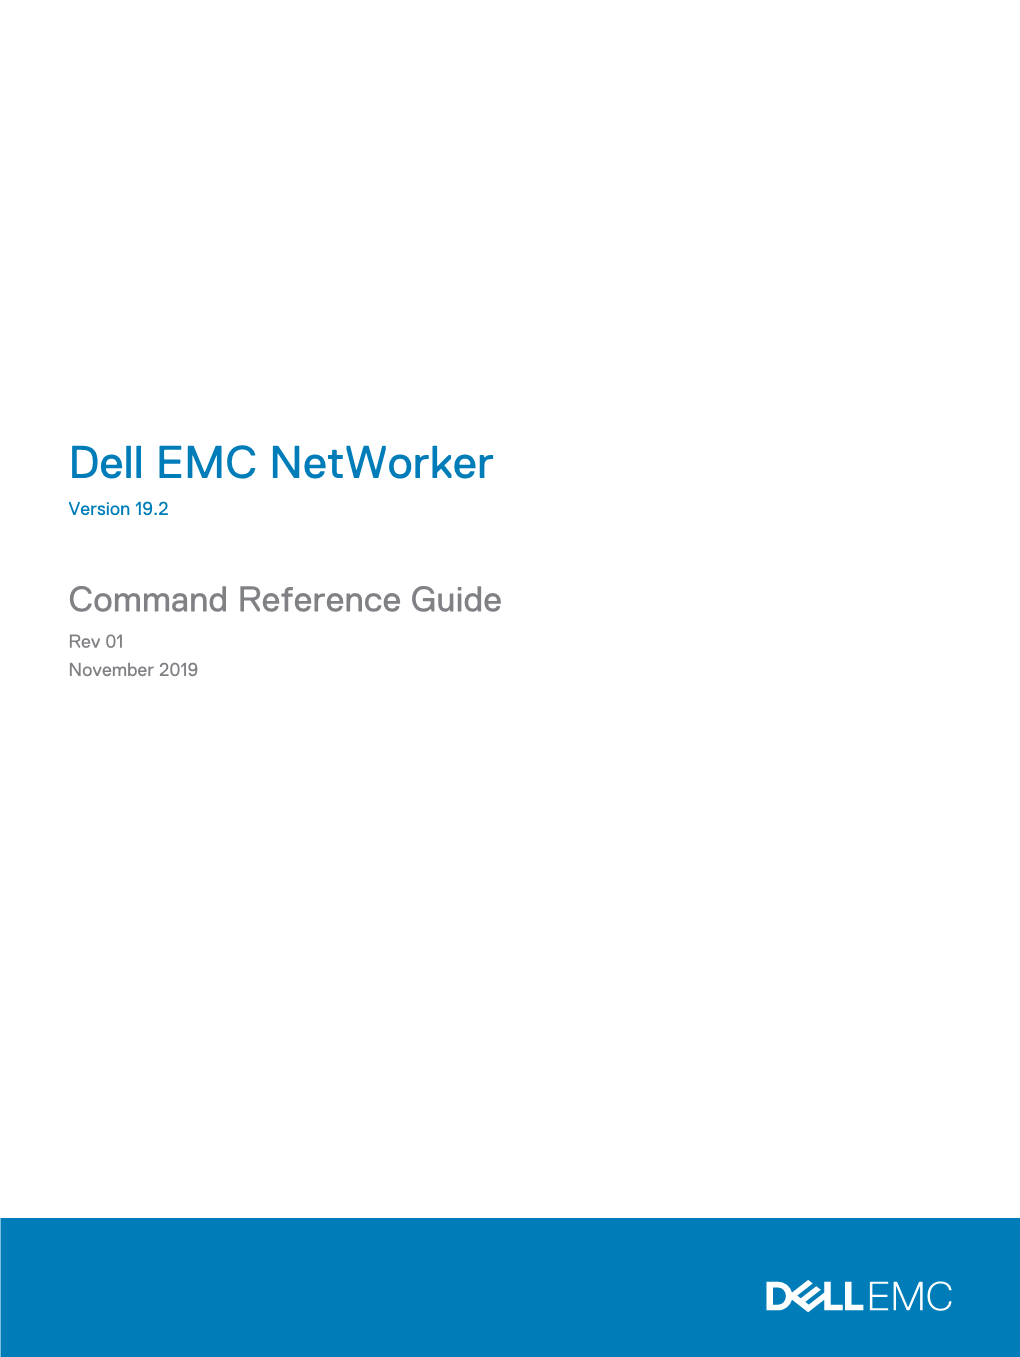 Dell EMC Networker Command Reference Guide Preface